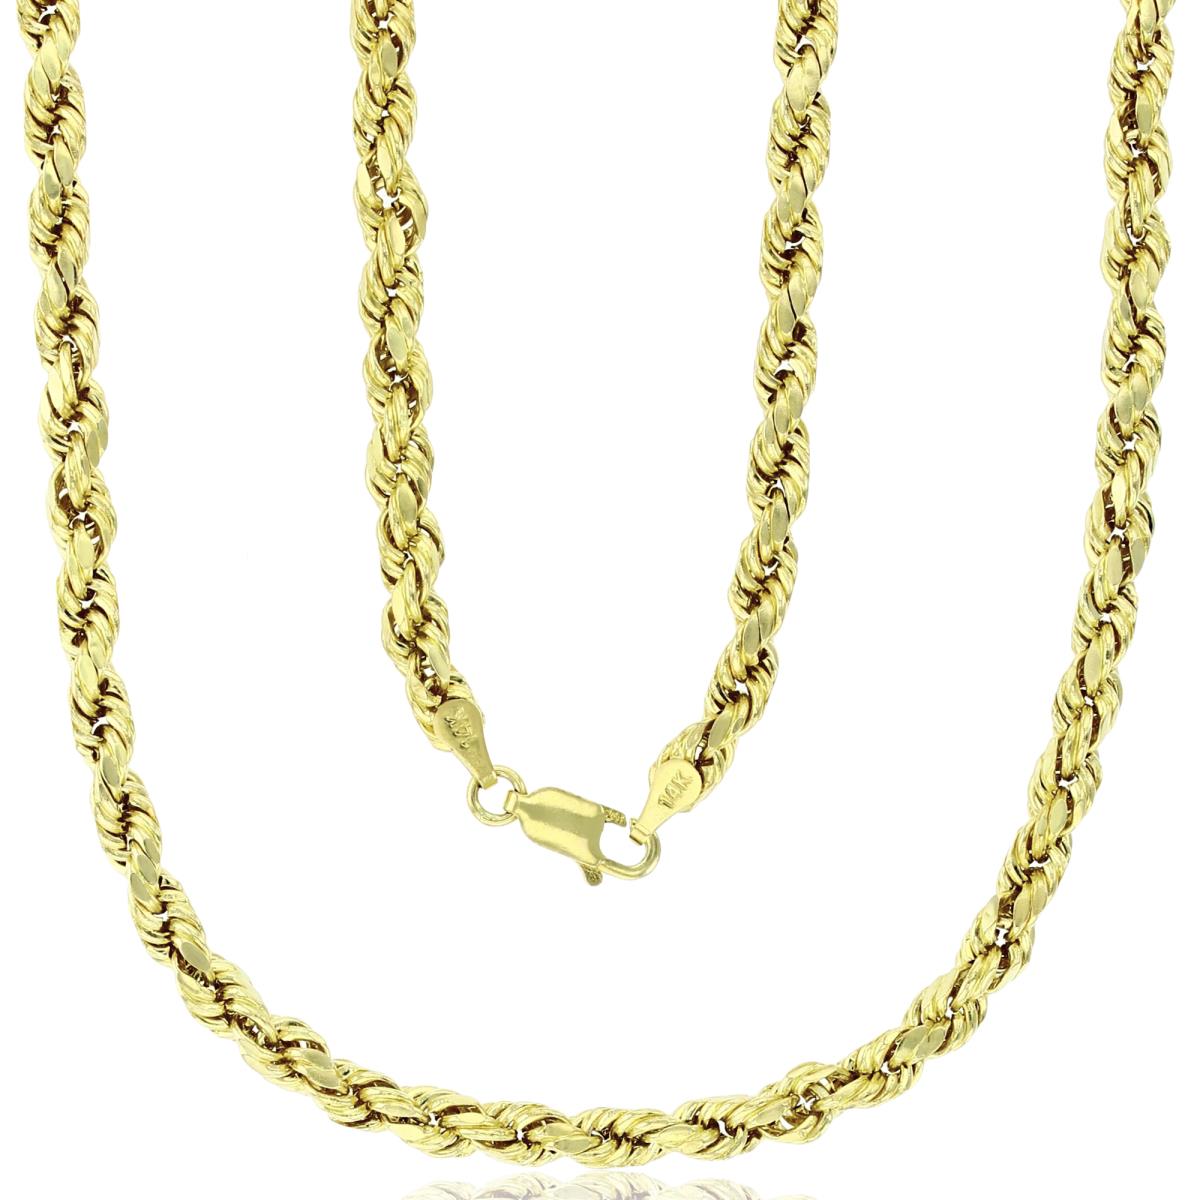 10k Yellow Gold 4mm Hollow DC Rope 030 8" Chain Bracelet